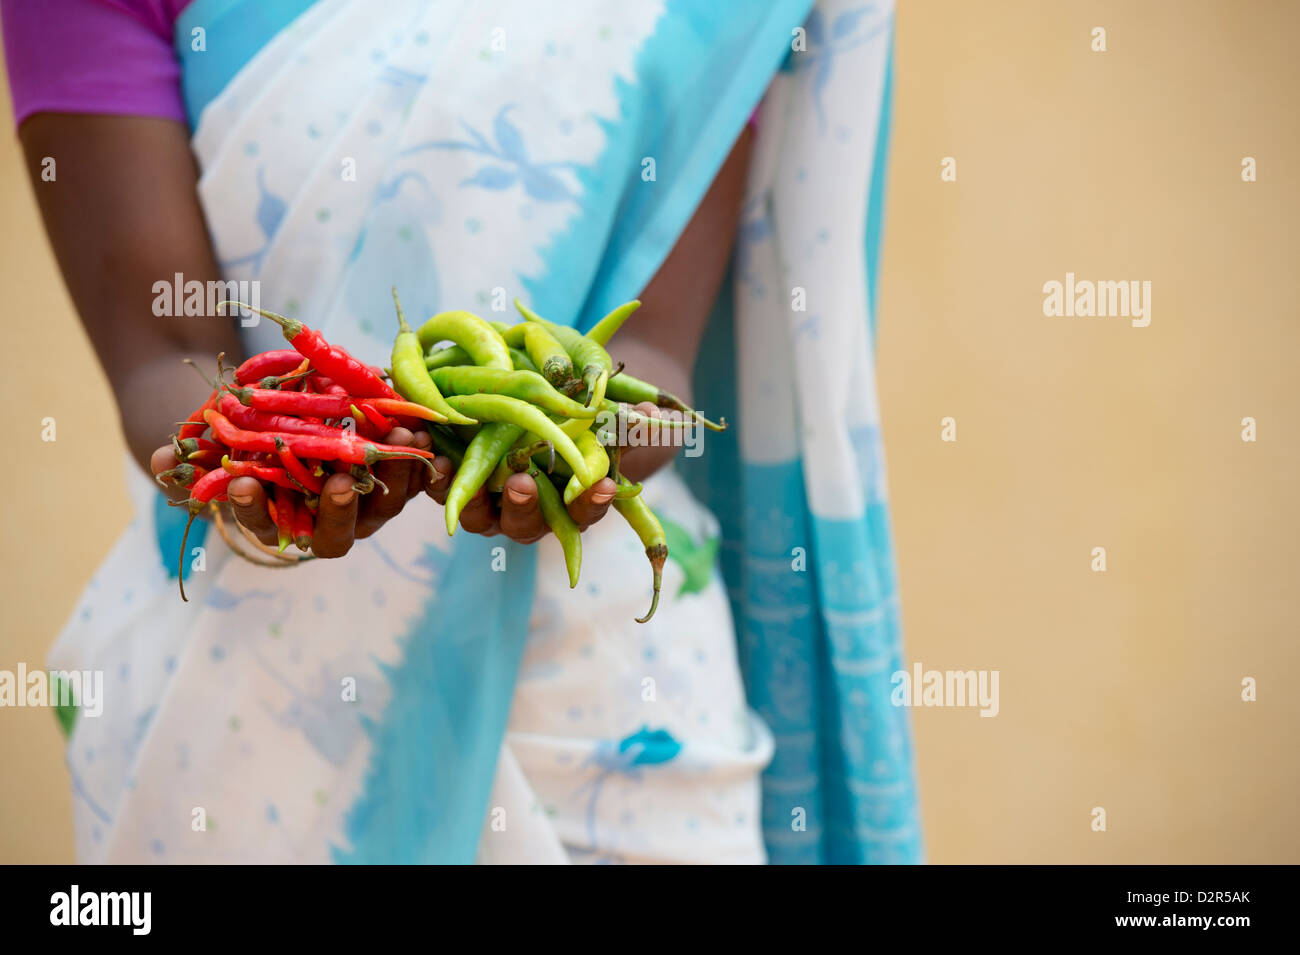 Rural Indian village woman holding fresh green and red chilies in her hands. Andhra Pradesh, India Stock Photo